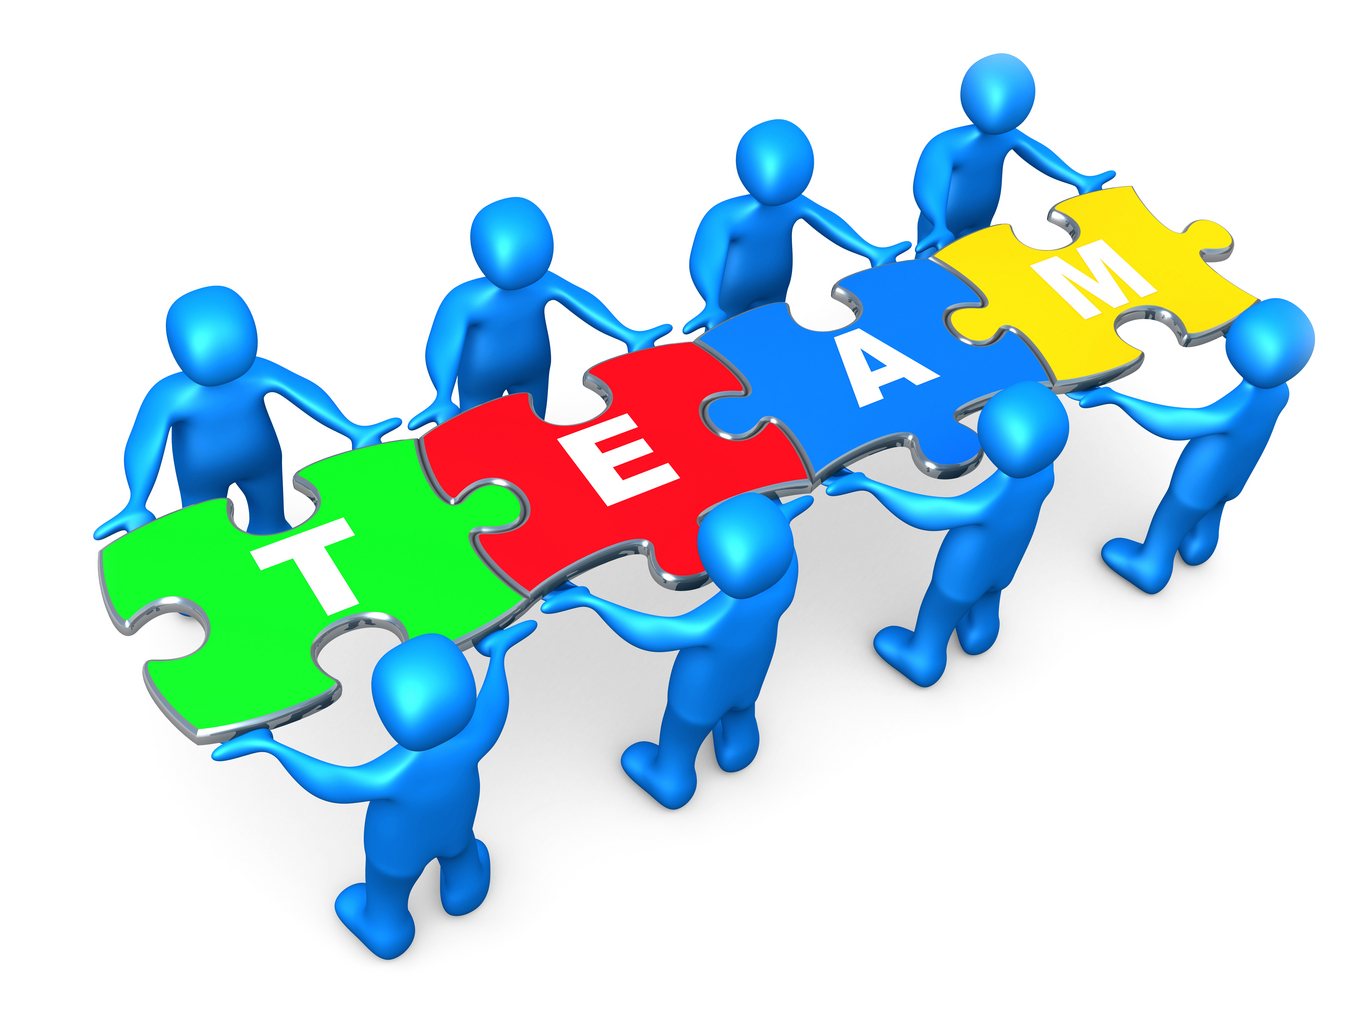 free clipart images teamwork - photo #17